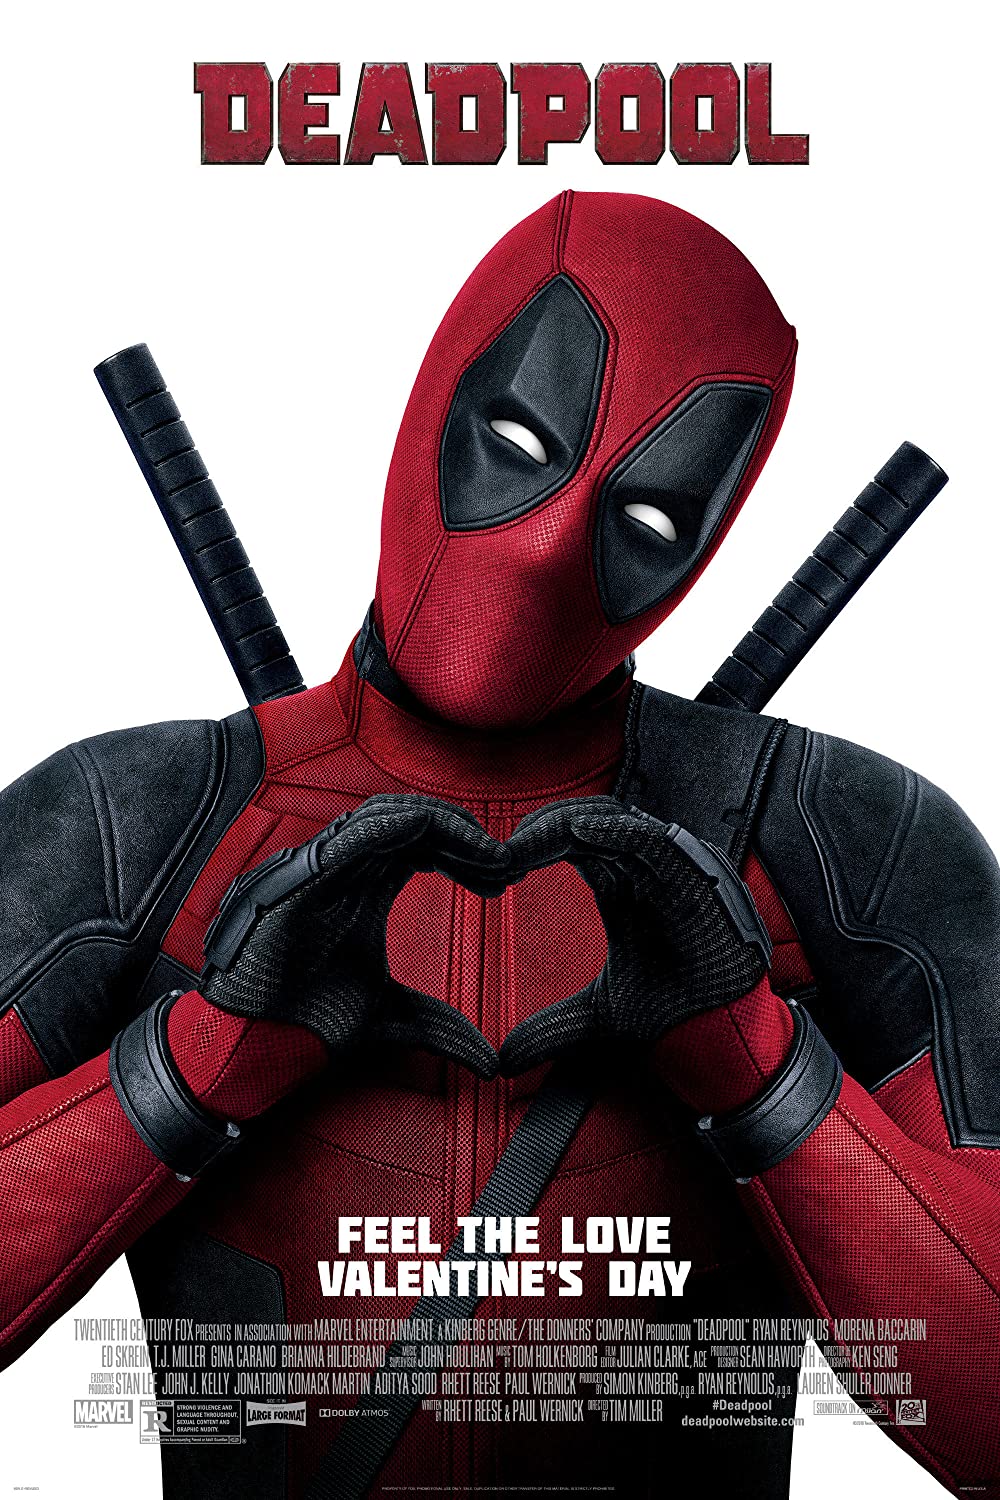 <p>Wade Wilson (Ryan Reynolds) is a former Special Forces operative who now works as a mercenary. His world comes crashing down when evil scientist Ajax (Ed Skrein) tortures, disfigures and transforms him into Deadpool. The rogue experiment leaves Deadpool with accelerated healing powers and a twisted sense of humor. With help from mutant allies Colossus and Negasonic Teenage Warhead (Brianna Hildebrand), Deadpool uses his new skills to hunt down the man who nearly destroyed his life.</p>